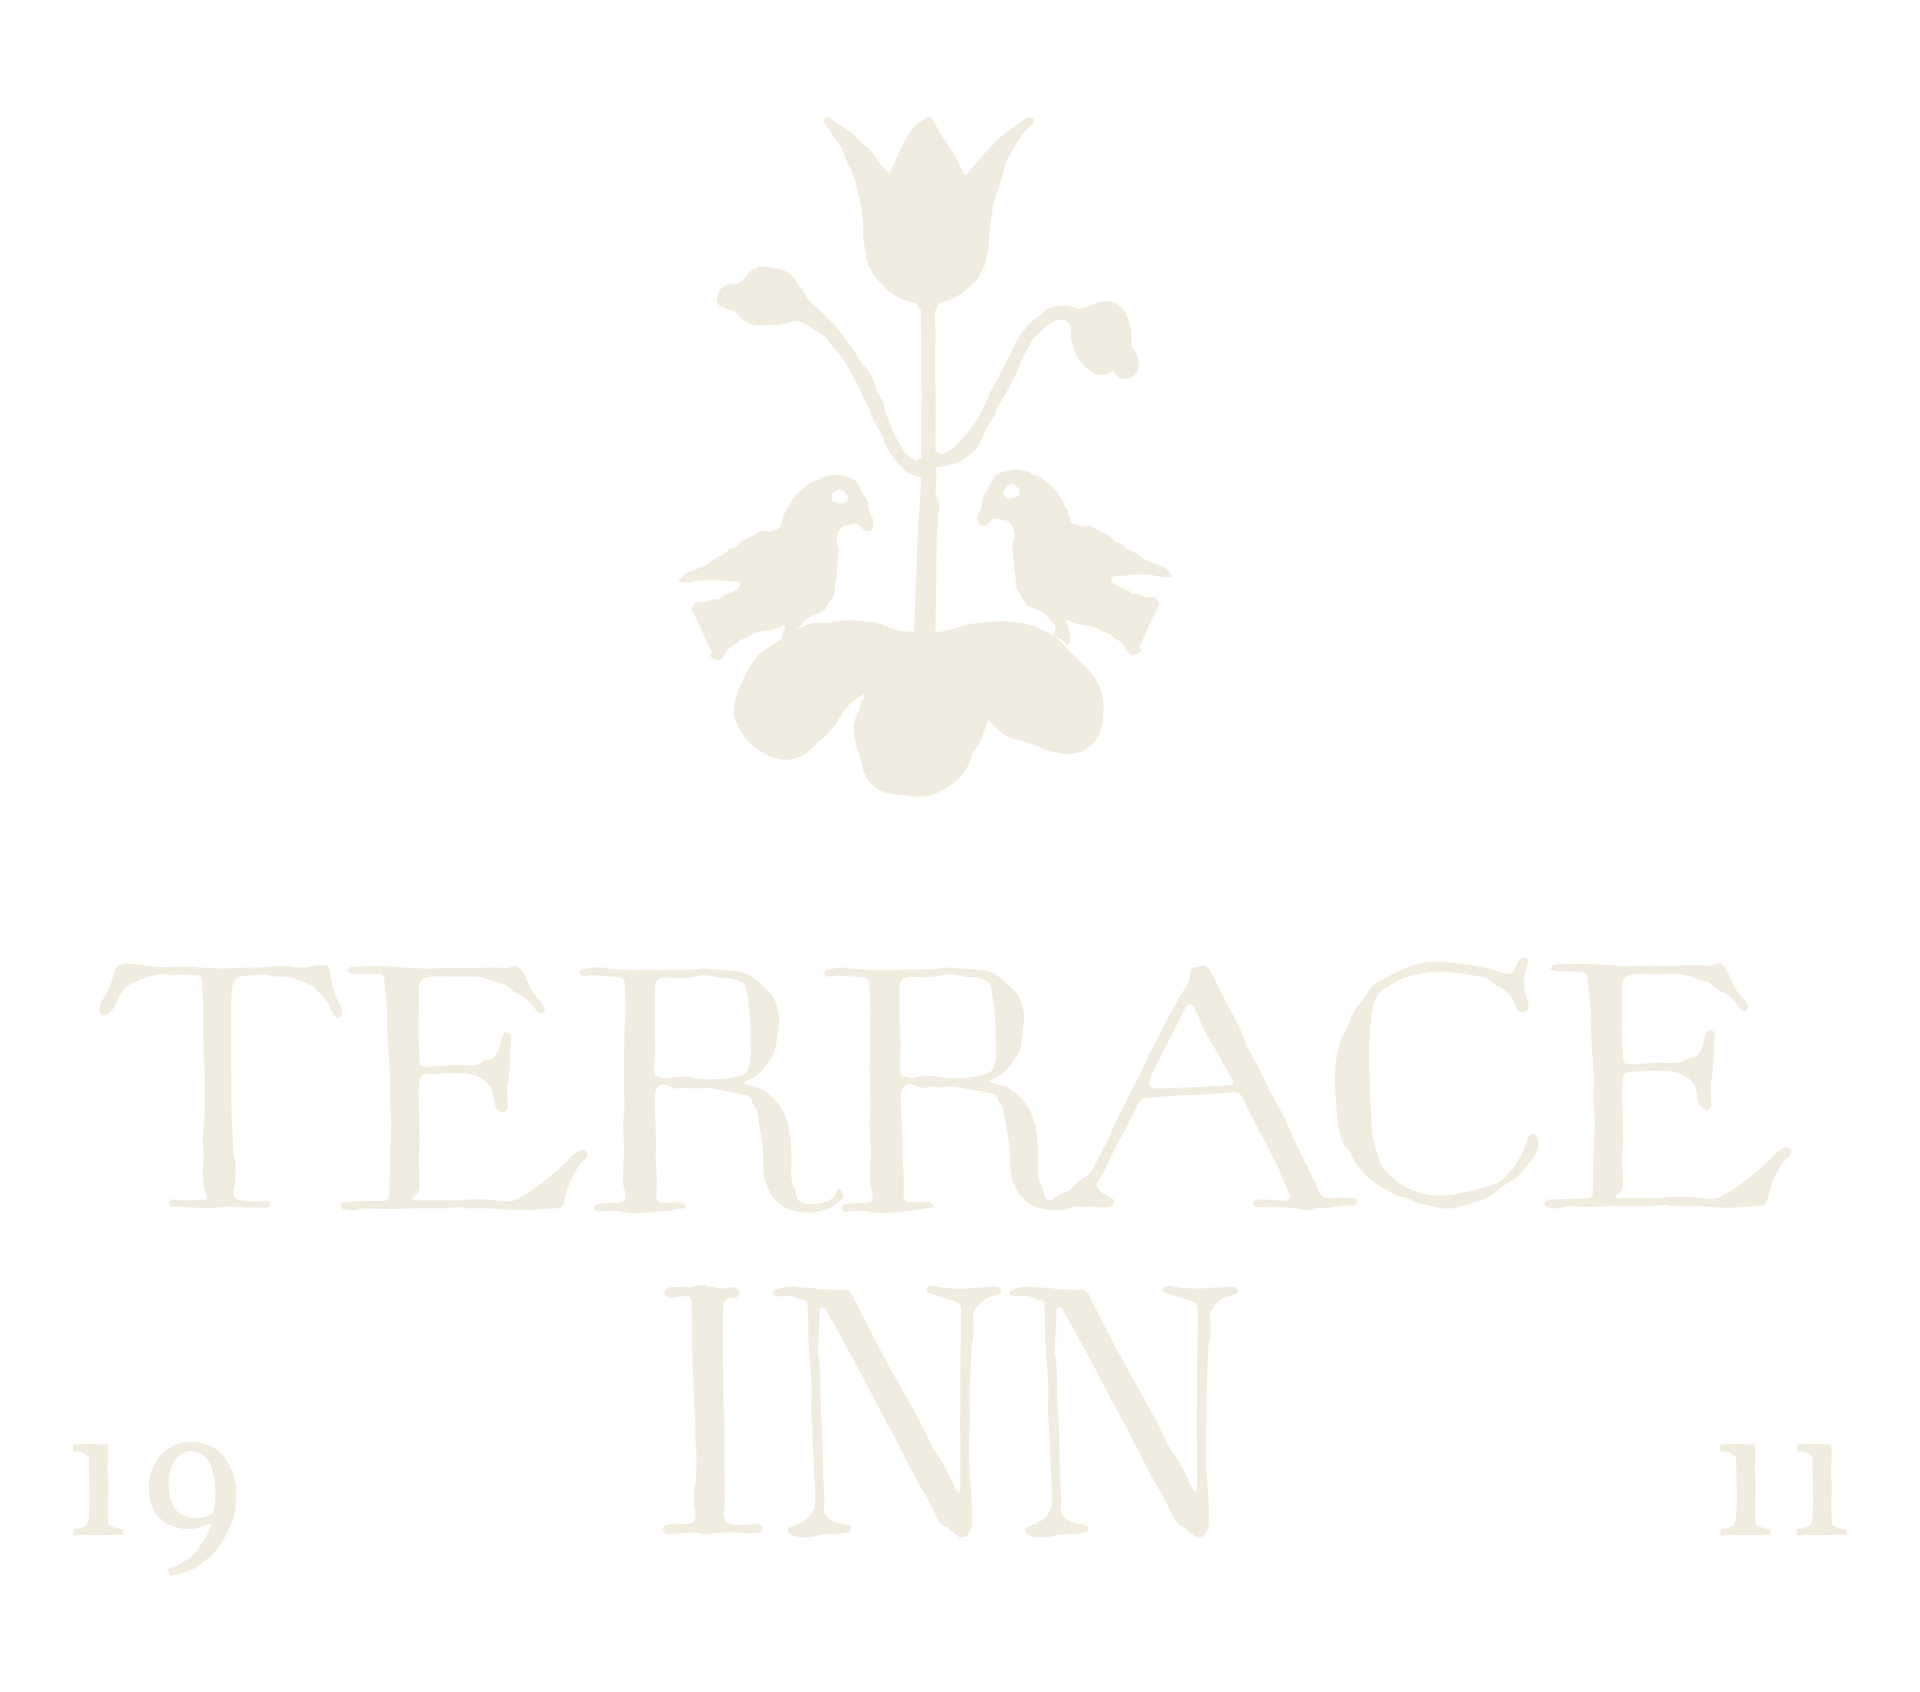 The terrace inn logo has a flower and two birds on it.